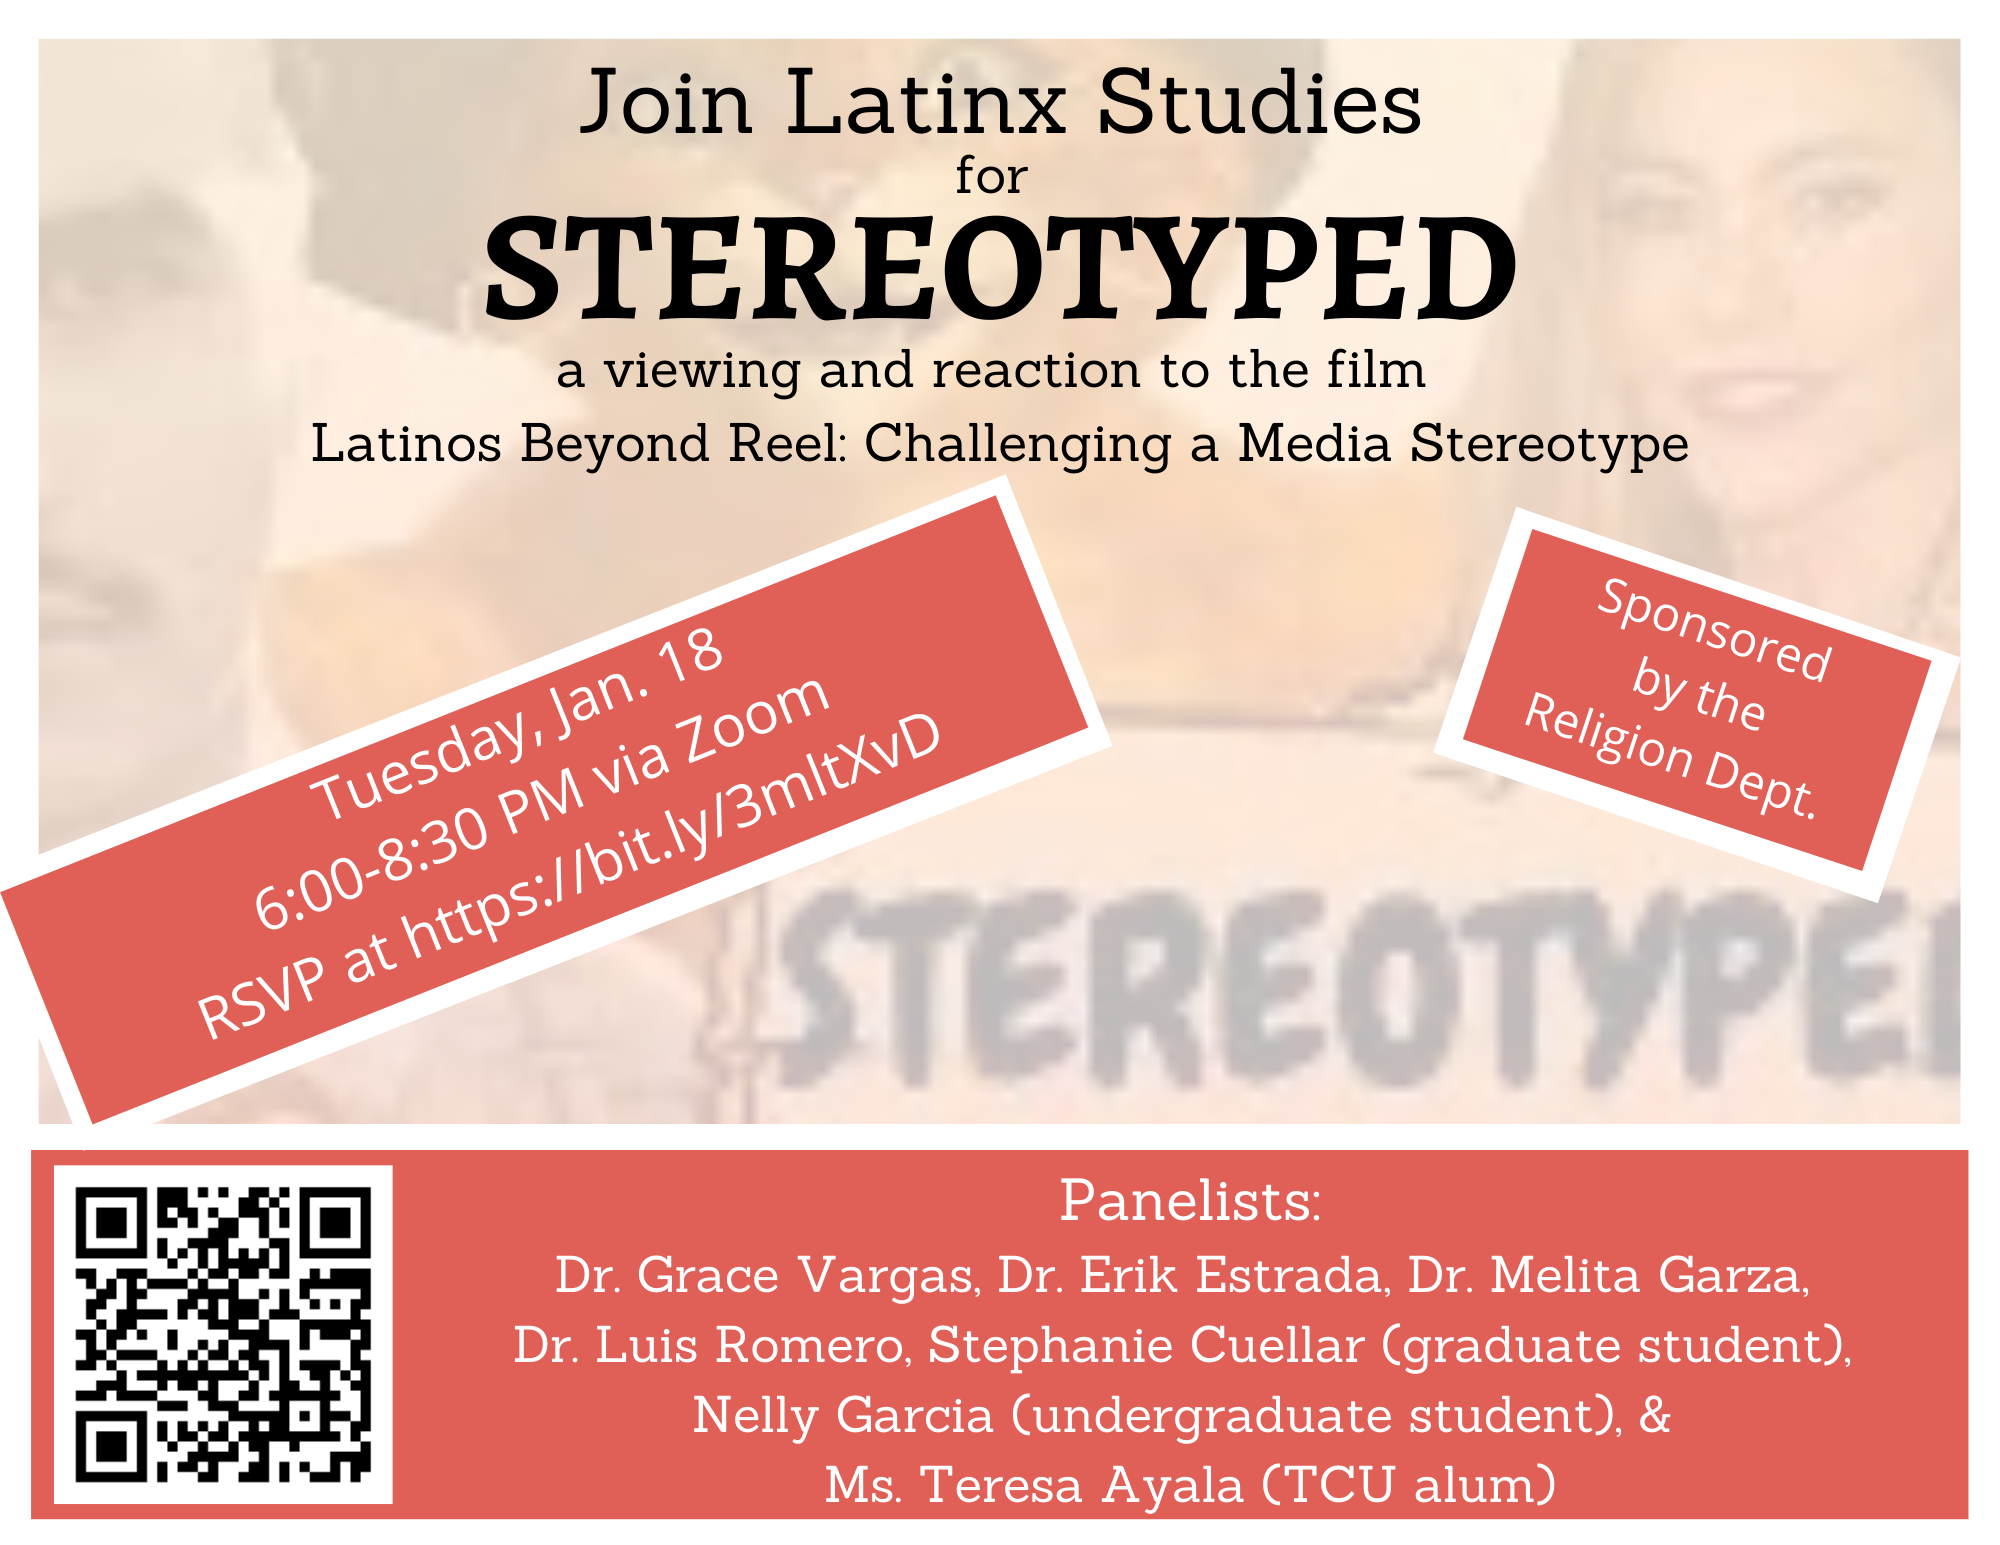 Stereotyped Flyer Updated 1.13.22